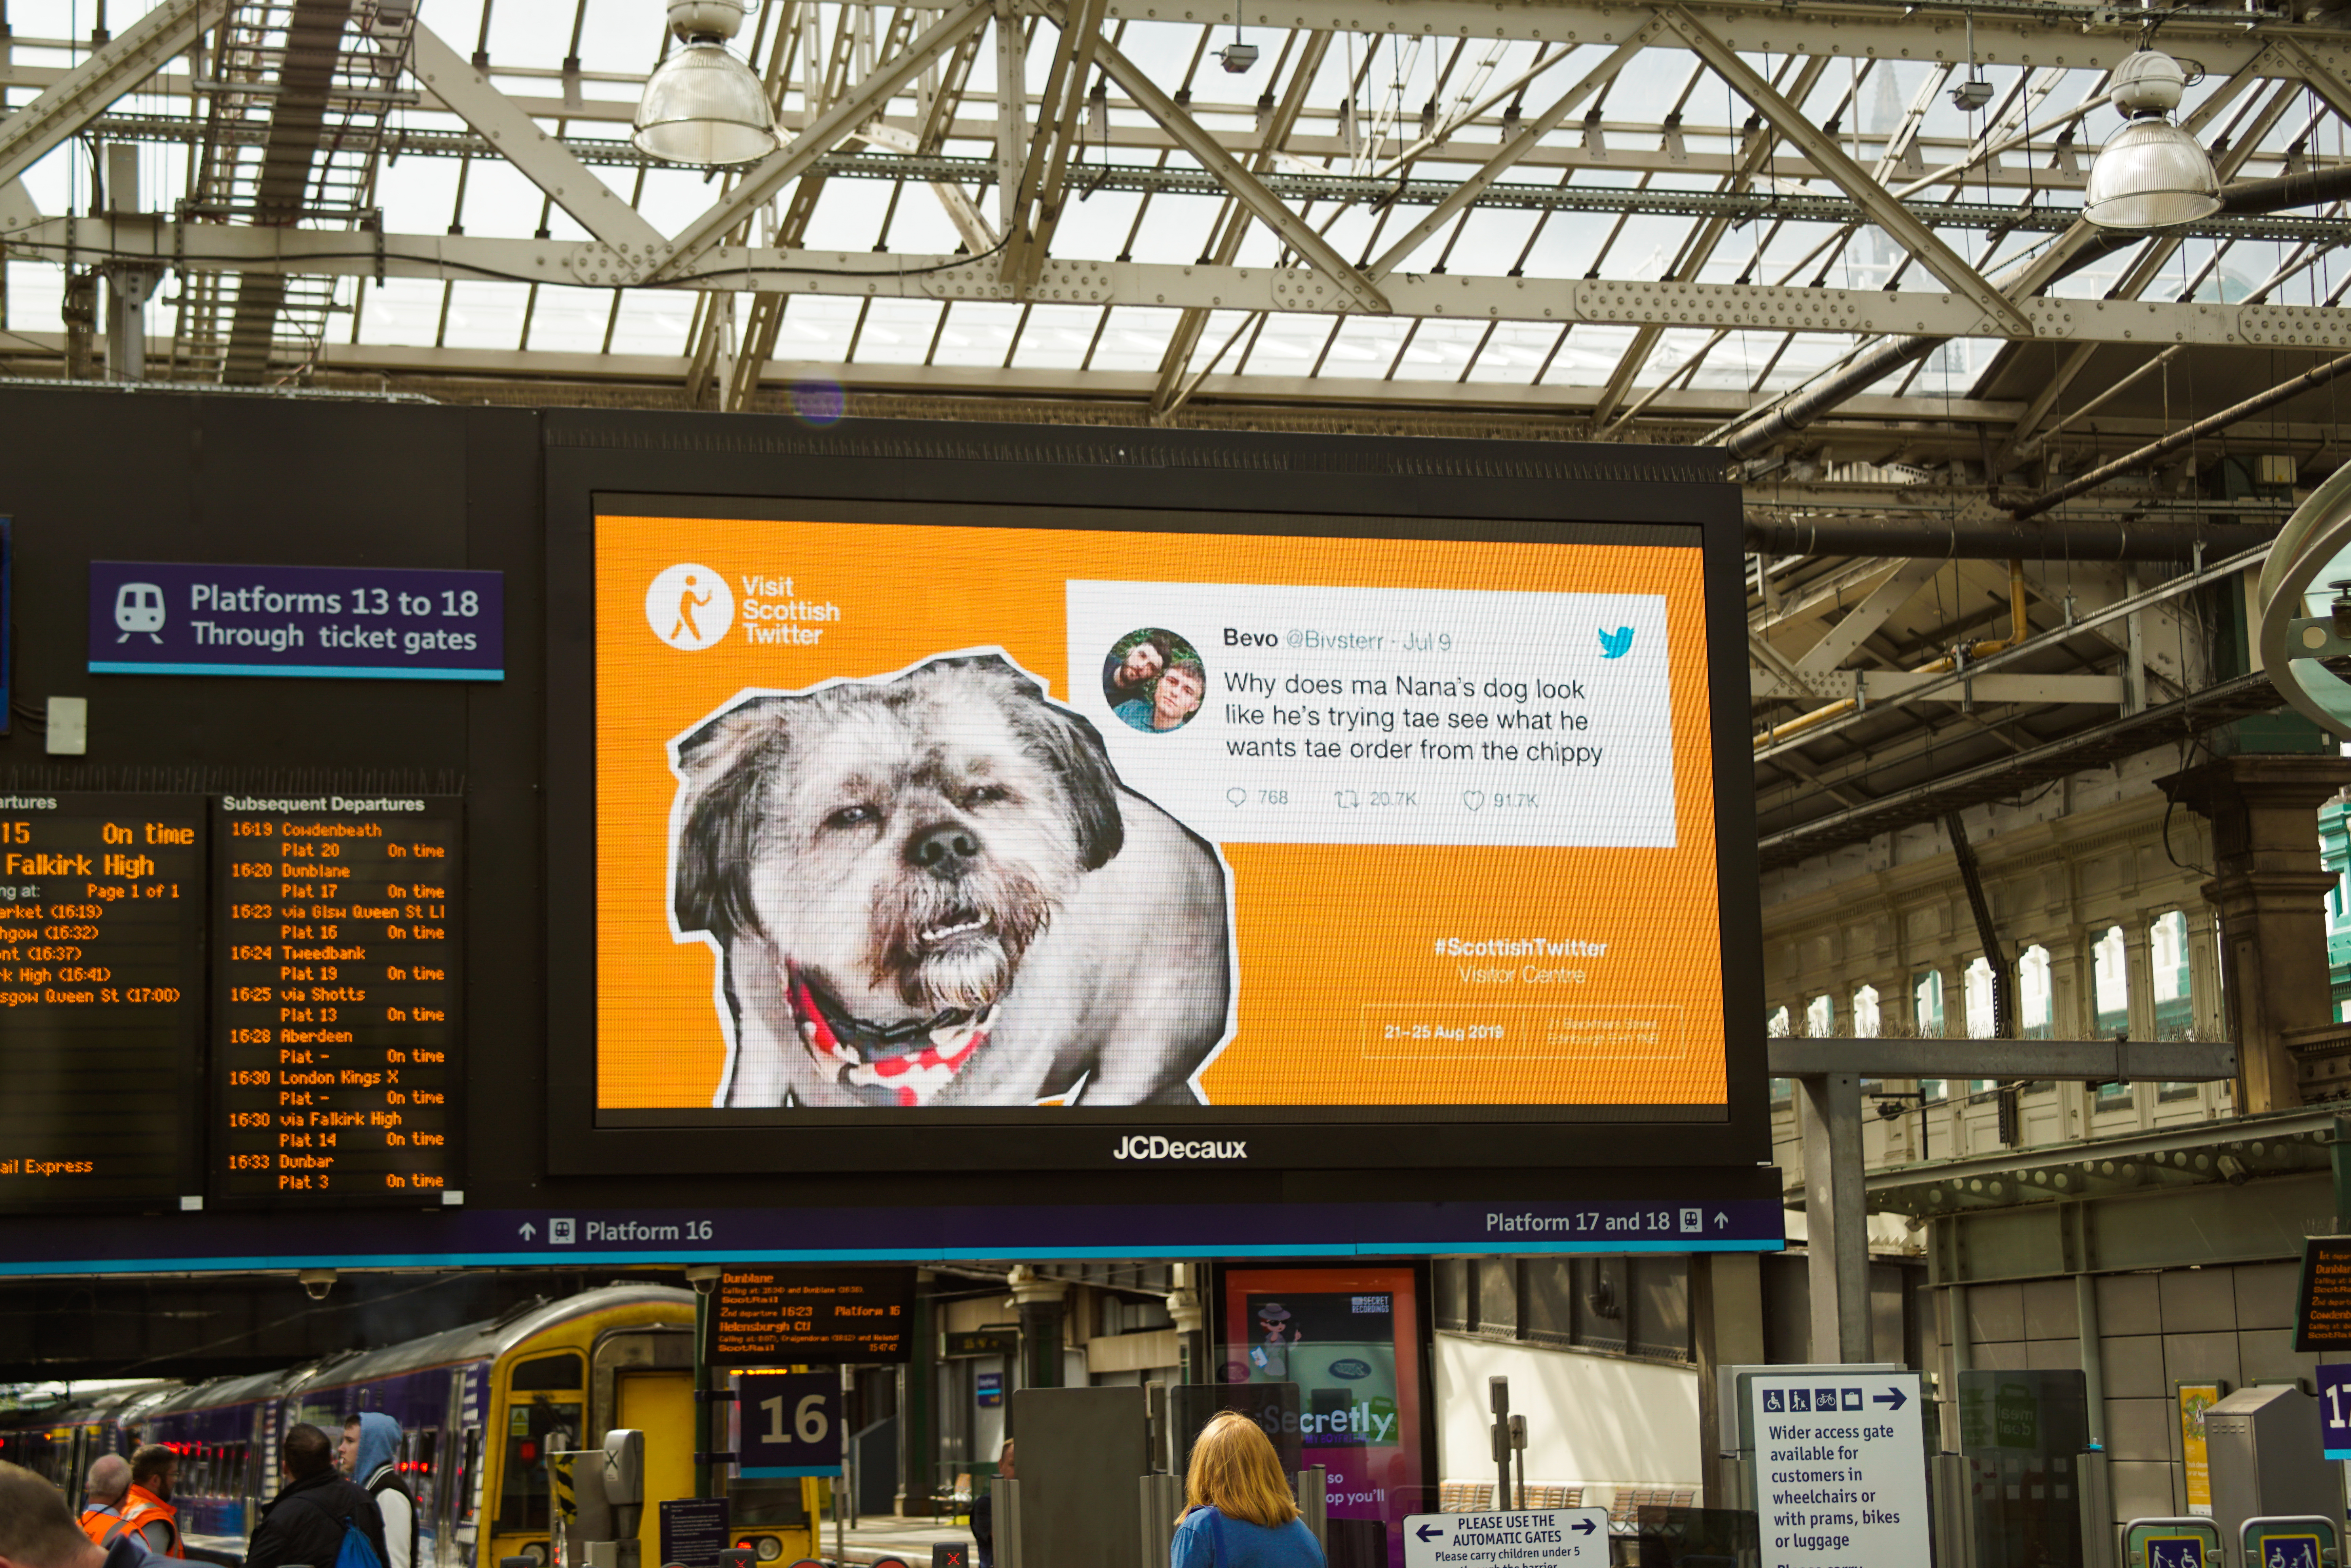 A photograph of a billboard featuring a Scottish Tweet and accompanying imagery